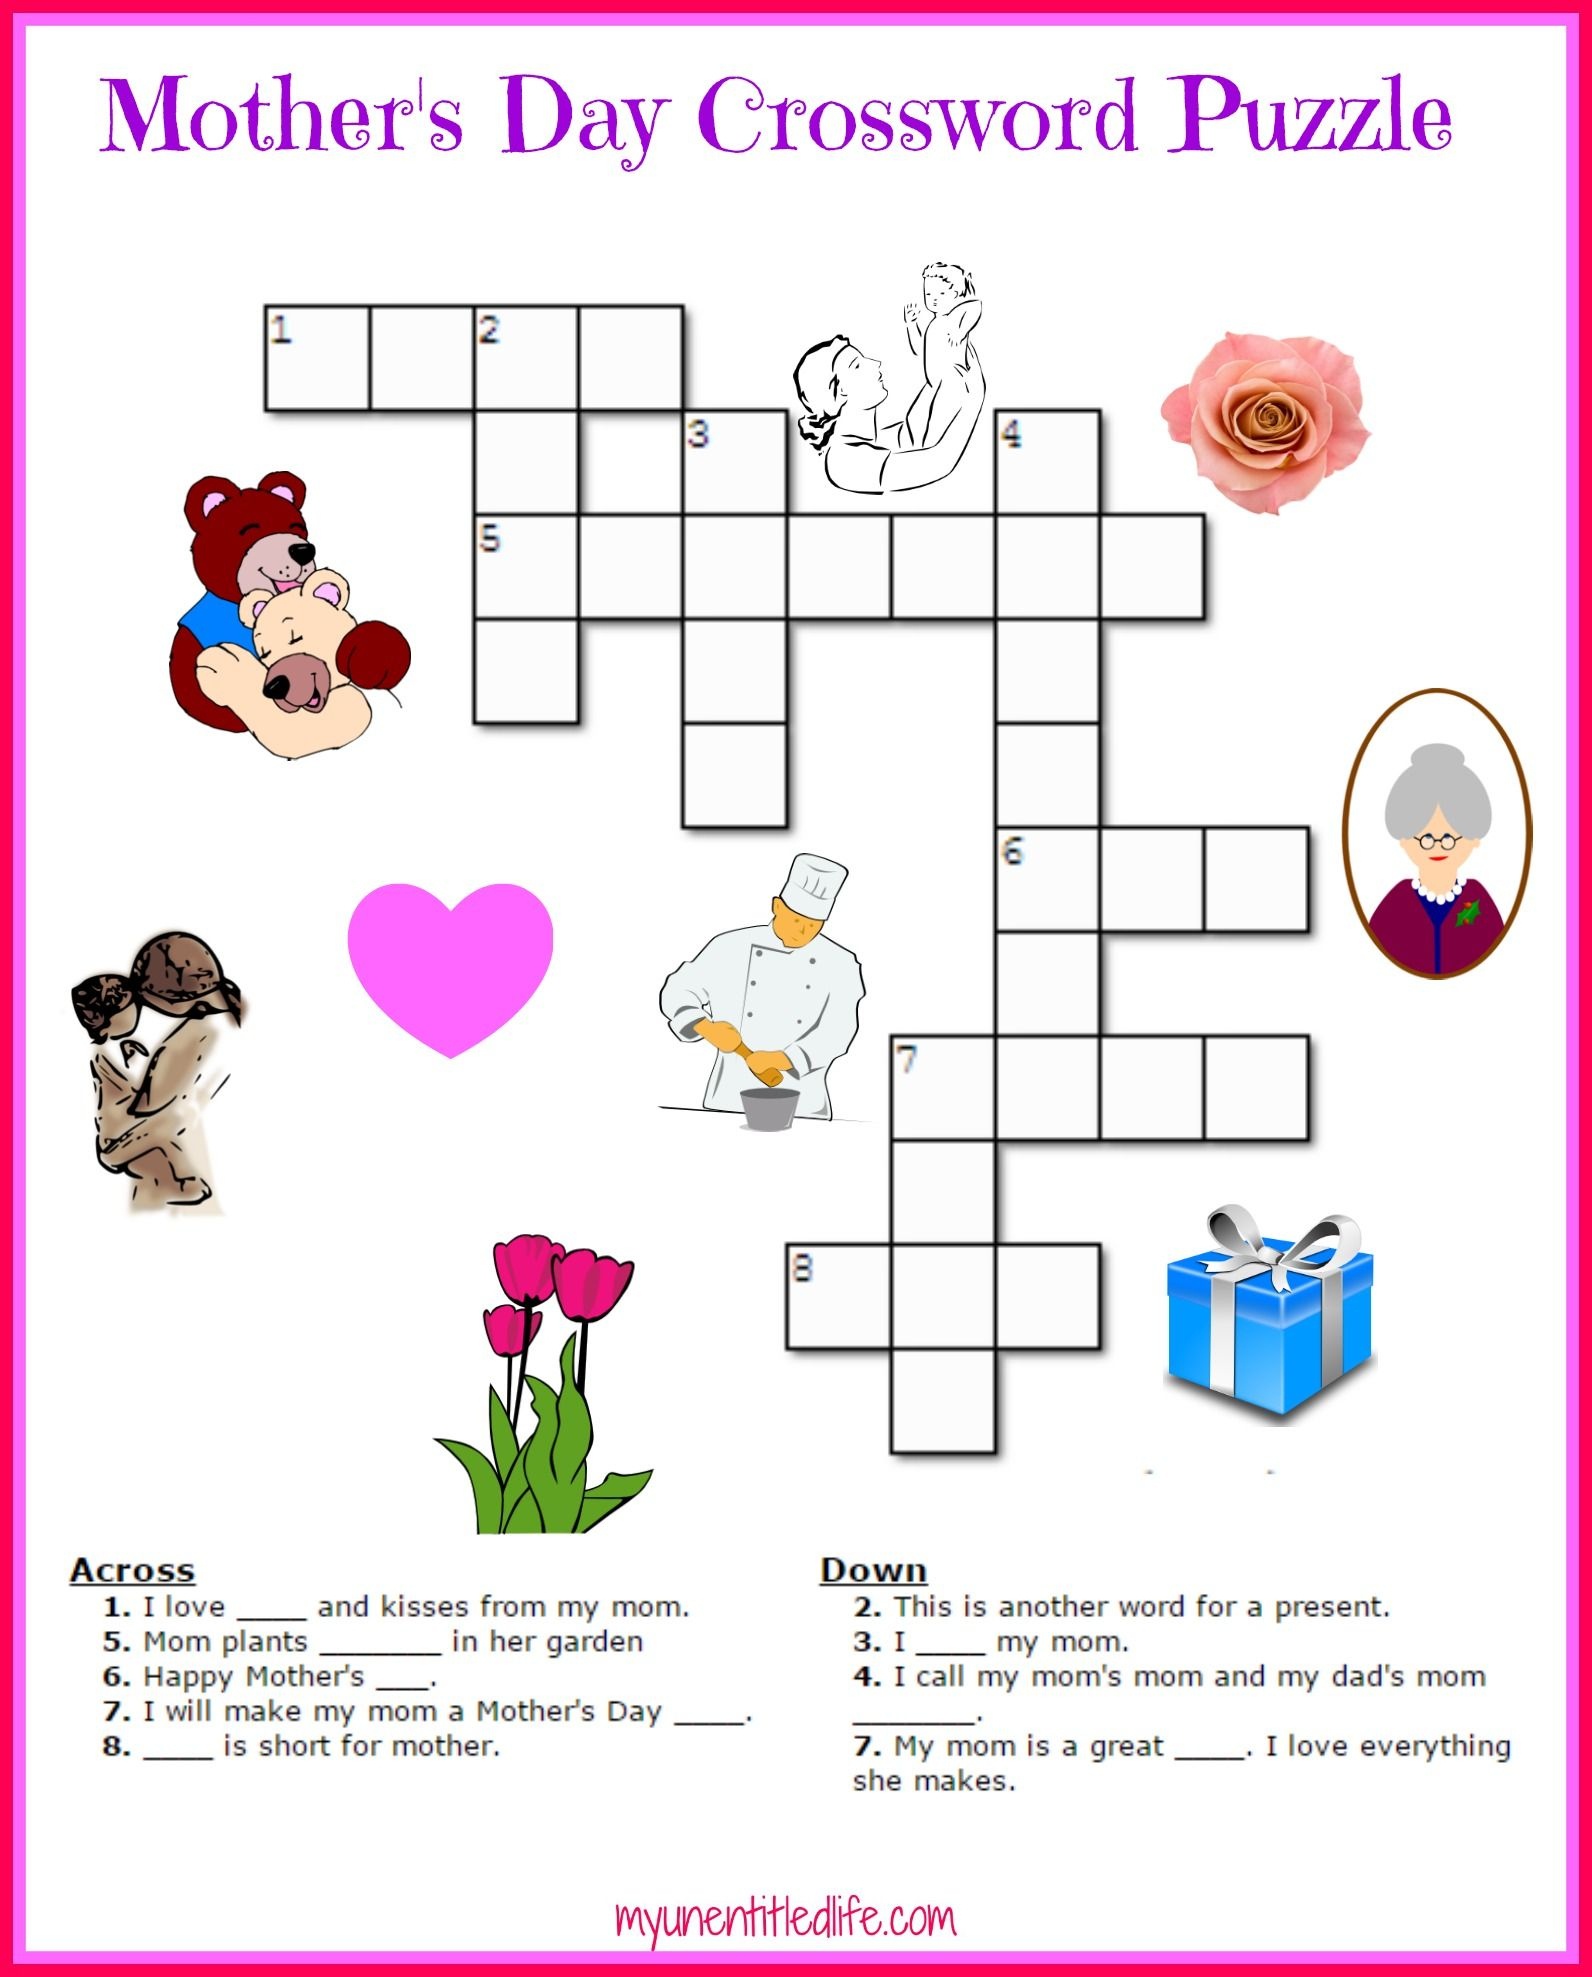 Free Mother&amp;#039;s Day Crossword Puzzle Printable | Crafts For Kids - Free Printable Mother&amp;amp;#039;s Day Games